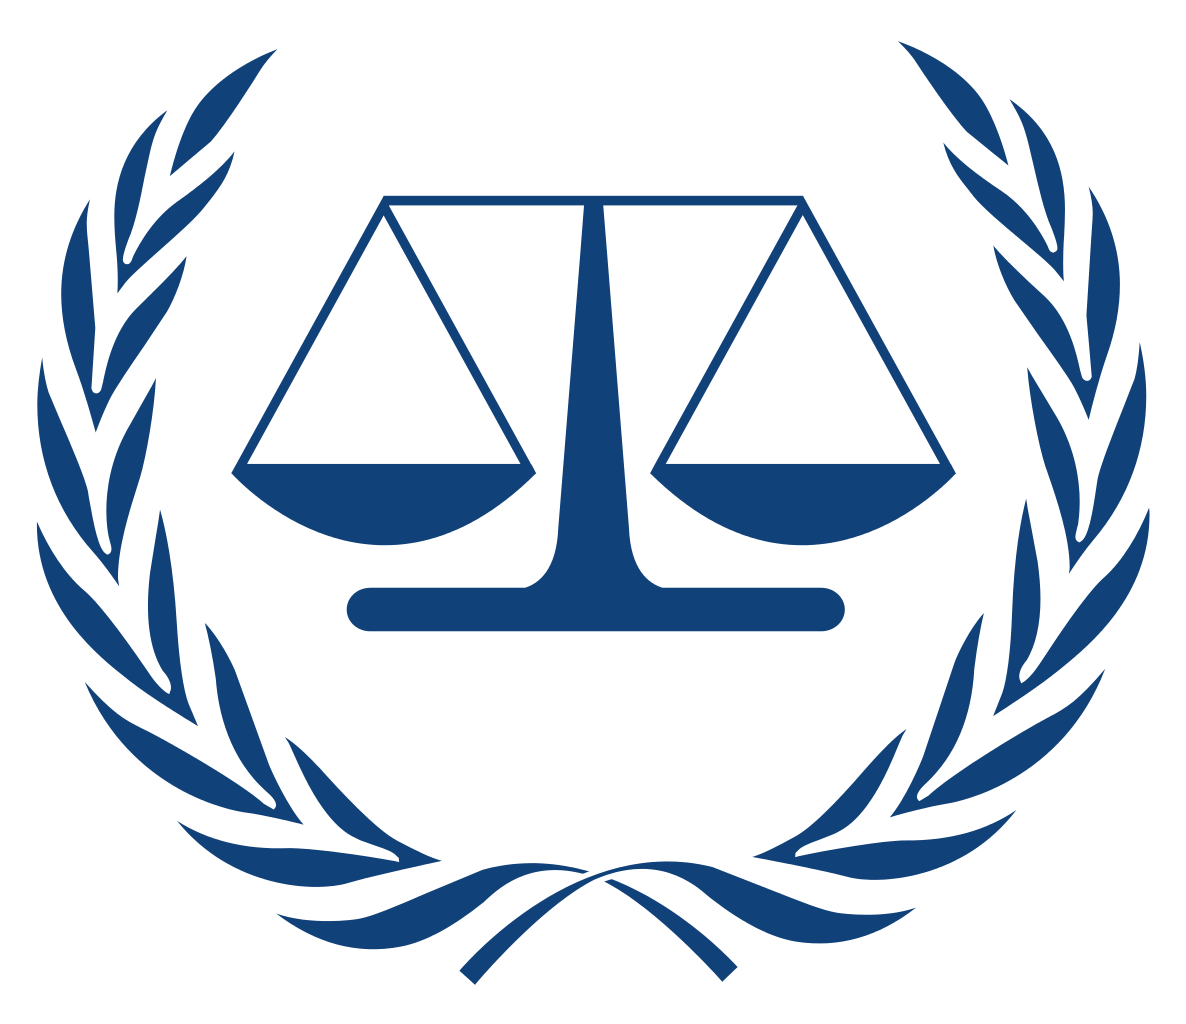 The constitution of india. Legal clipart international law